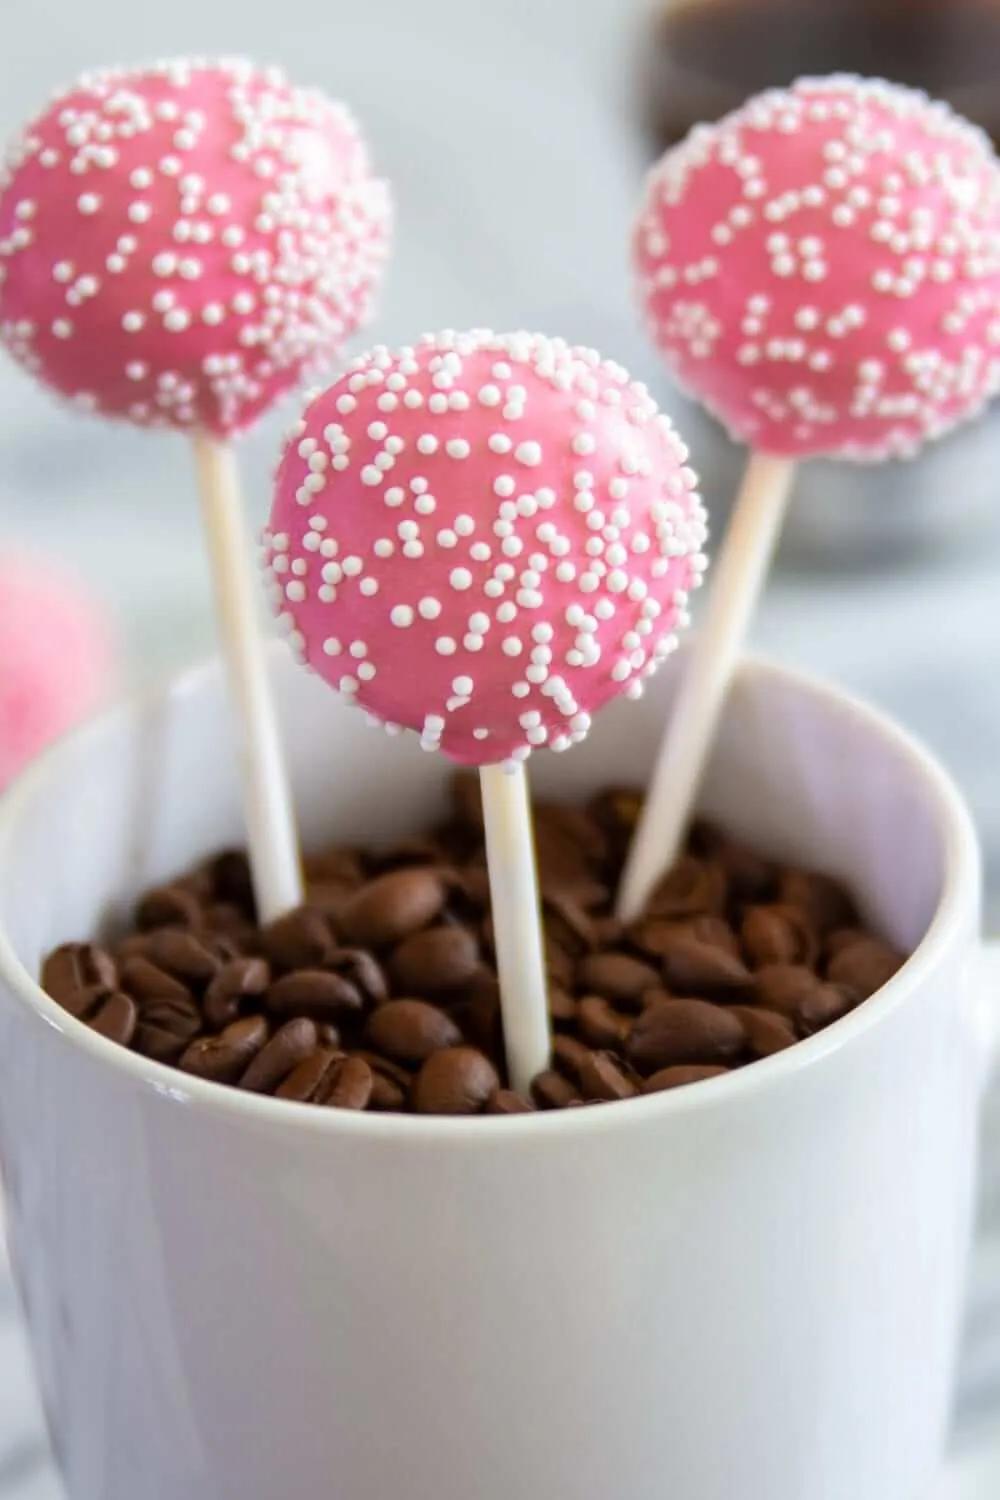 15 Tasty Cake Pops That Are Easy To Make - Sweet Money Bee